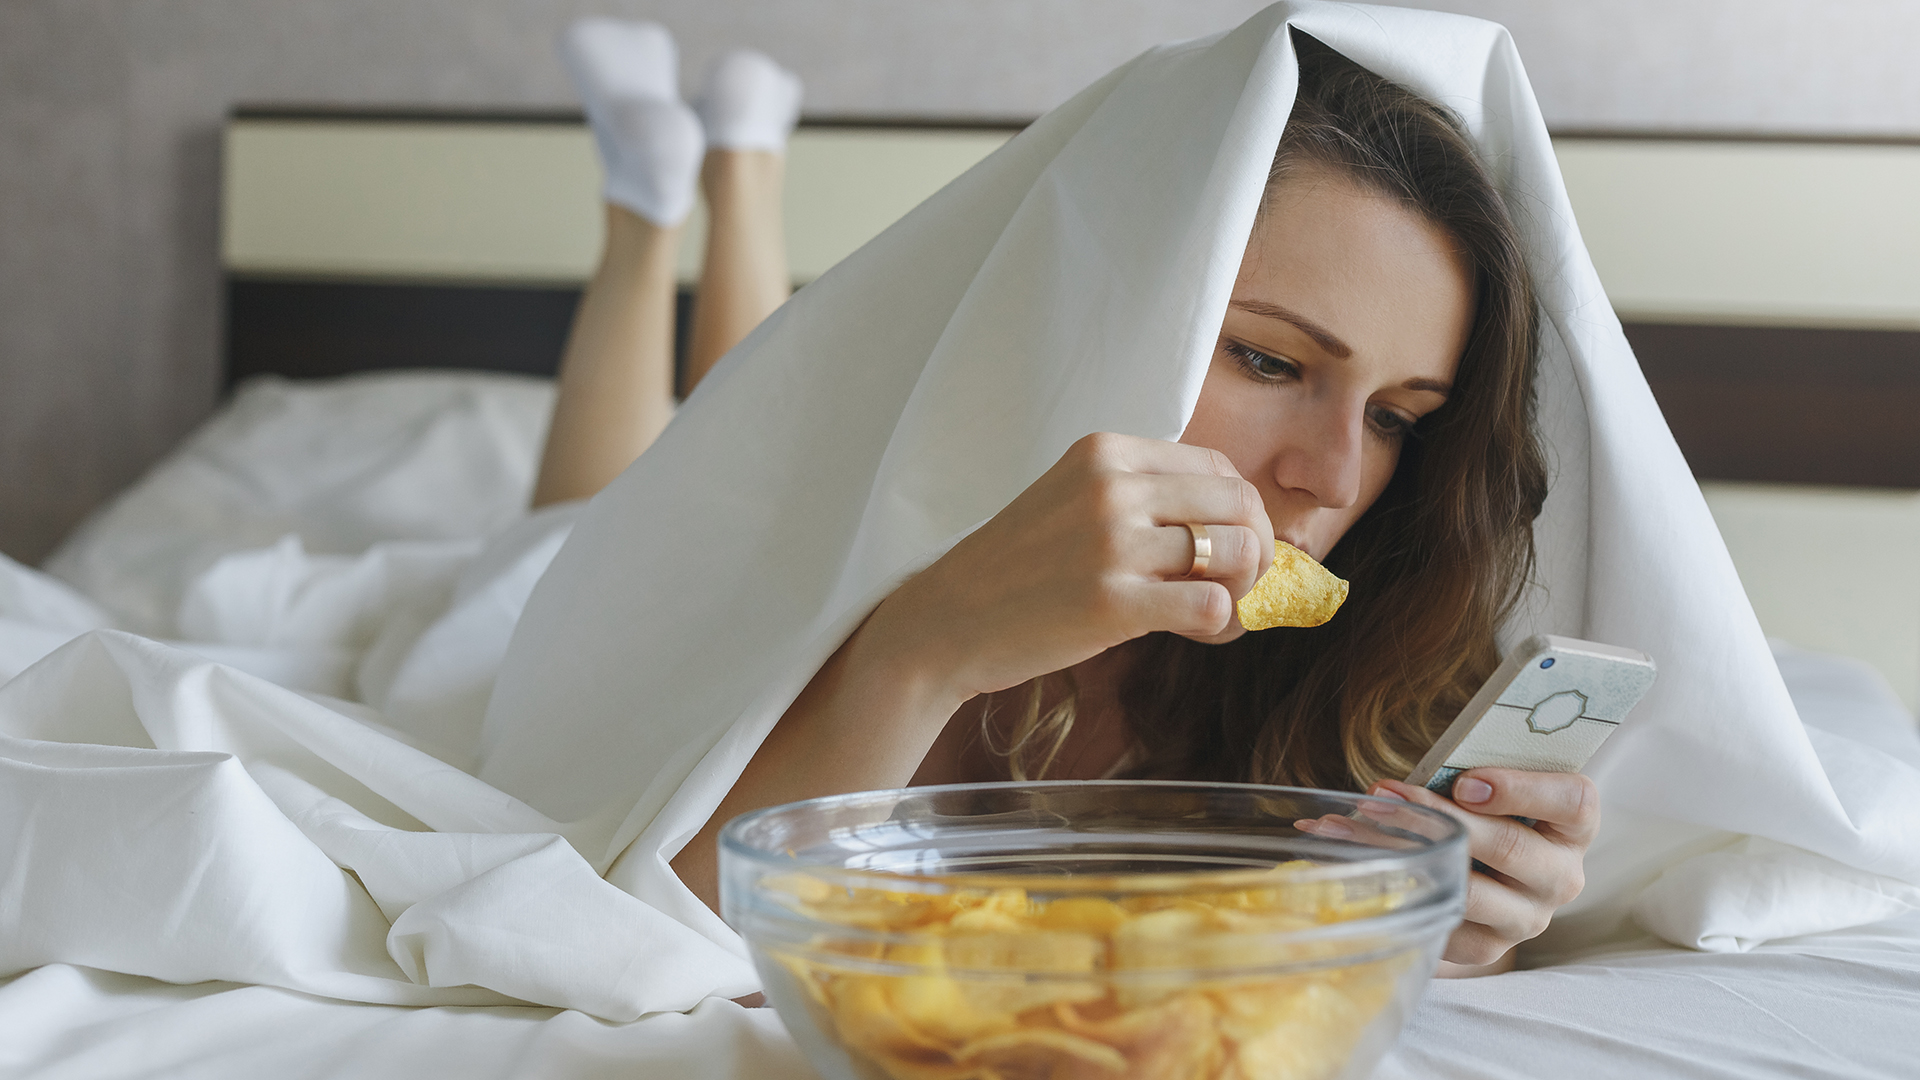 A woman lies on a bed eating crisps and scrolling through her phone